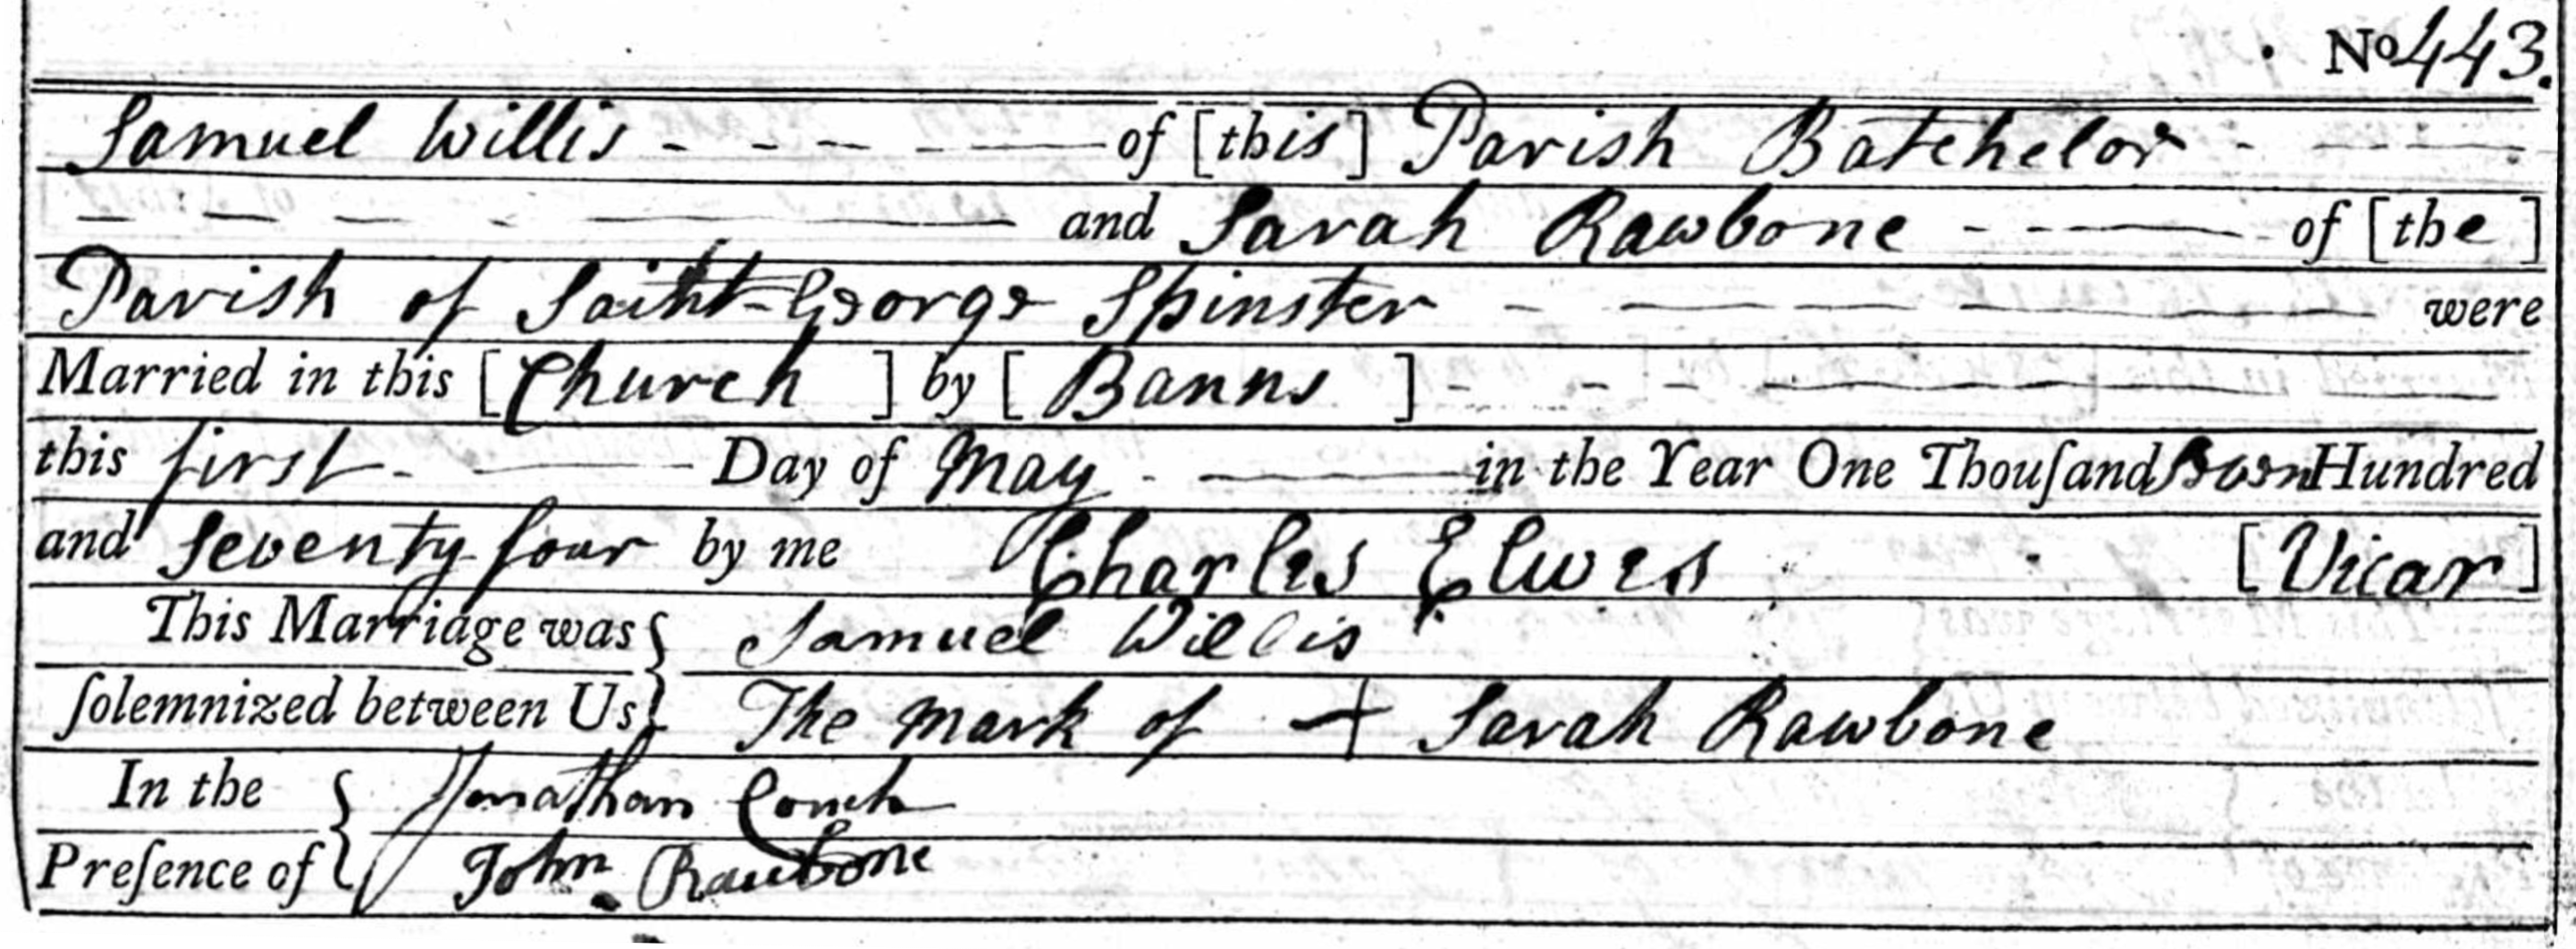 Figure 1: Marriage Register Entry for Samuel Willis and Sarah Rawbone